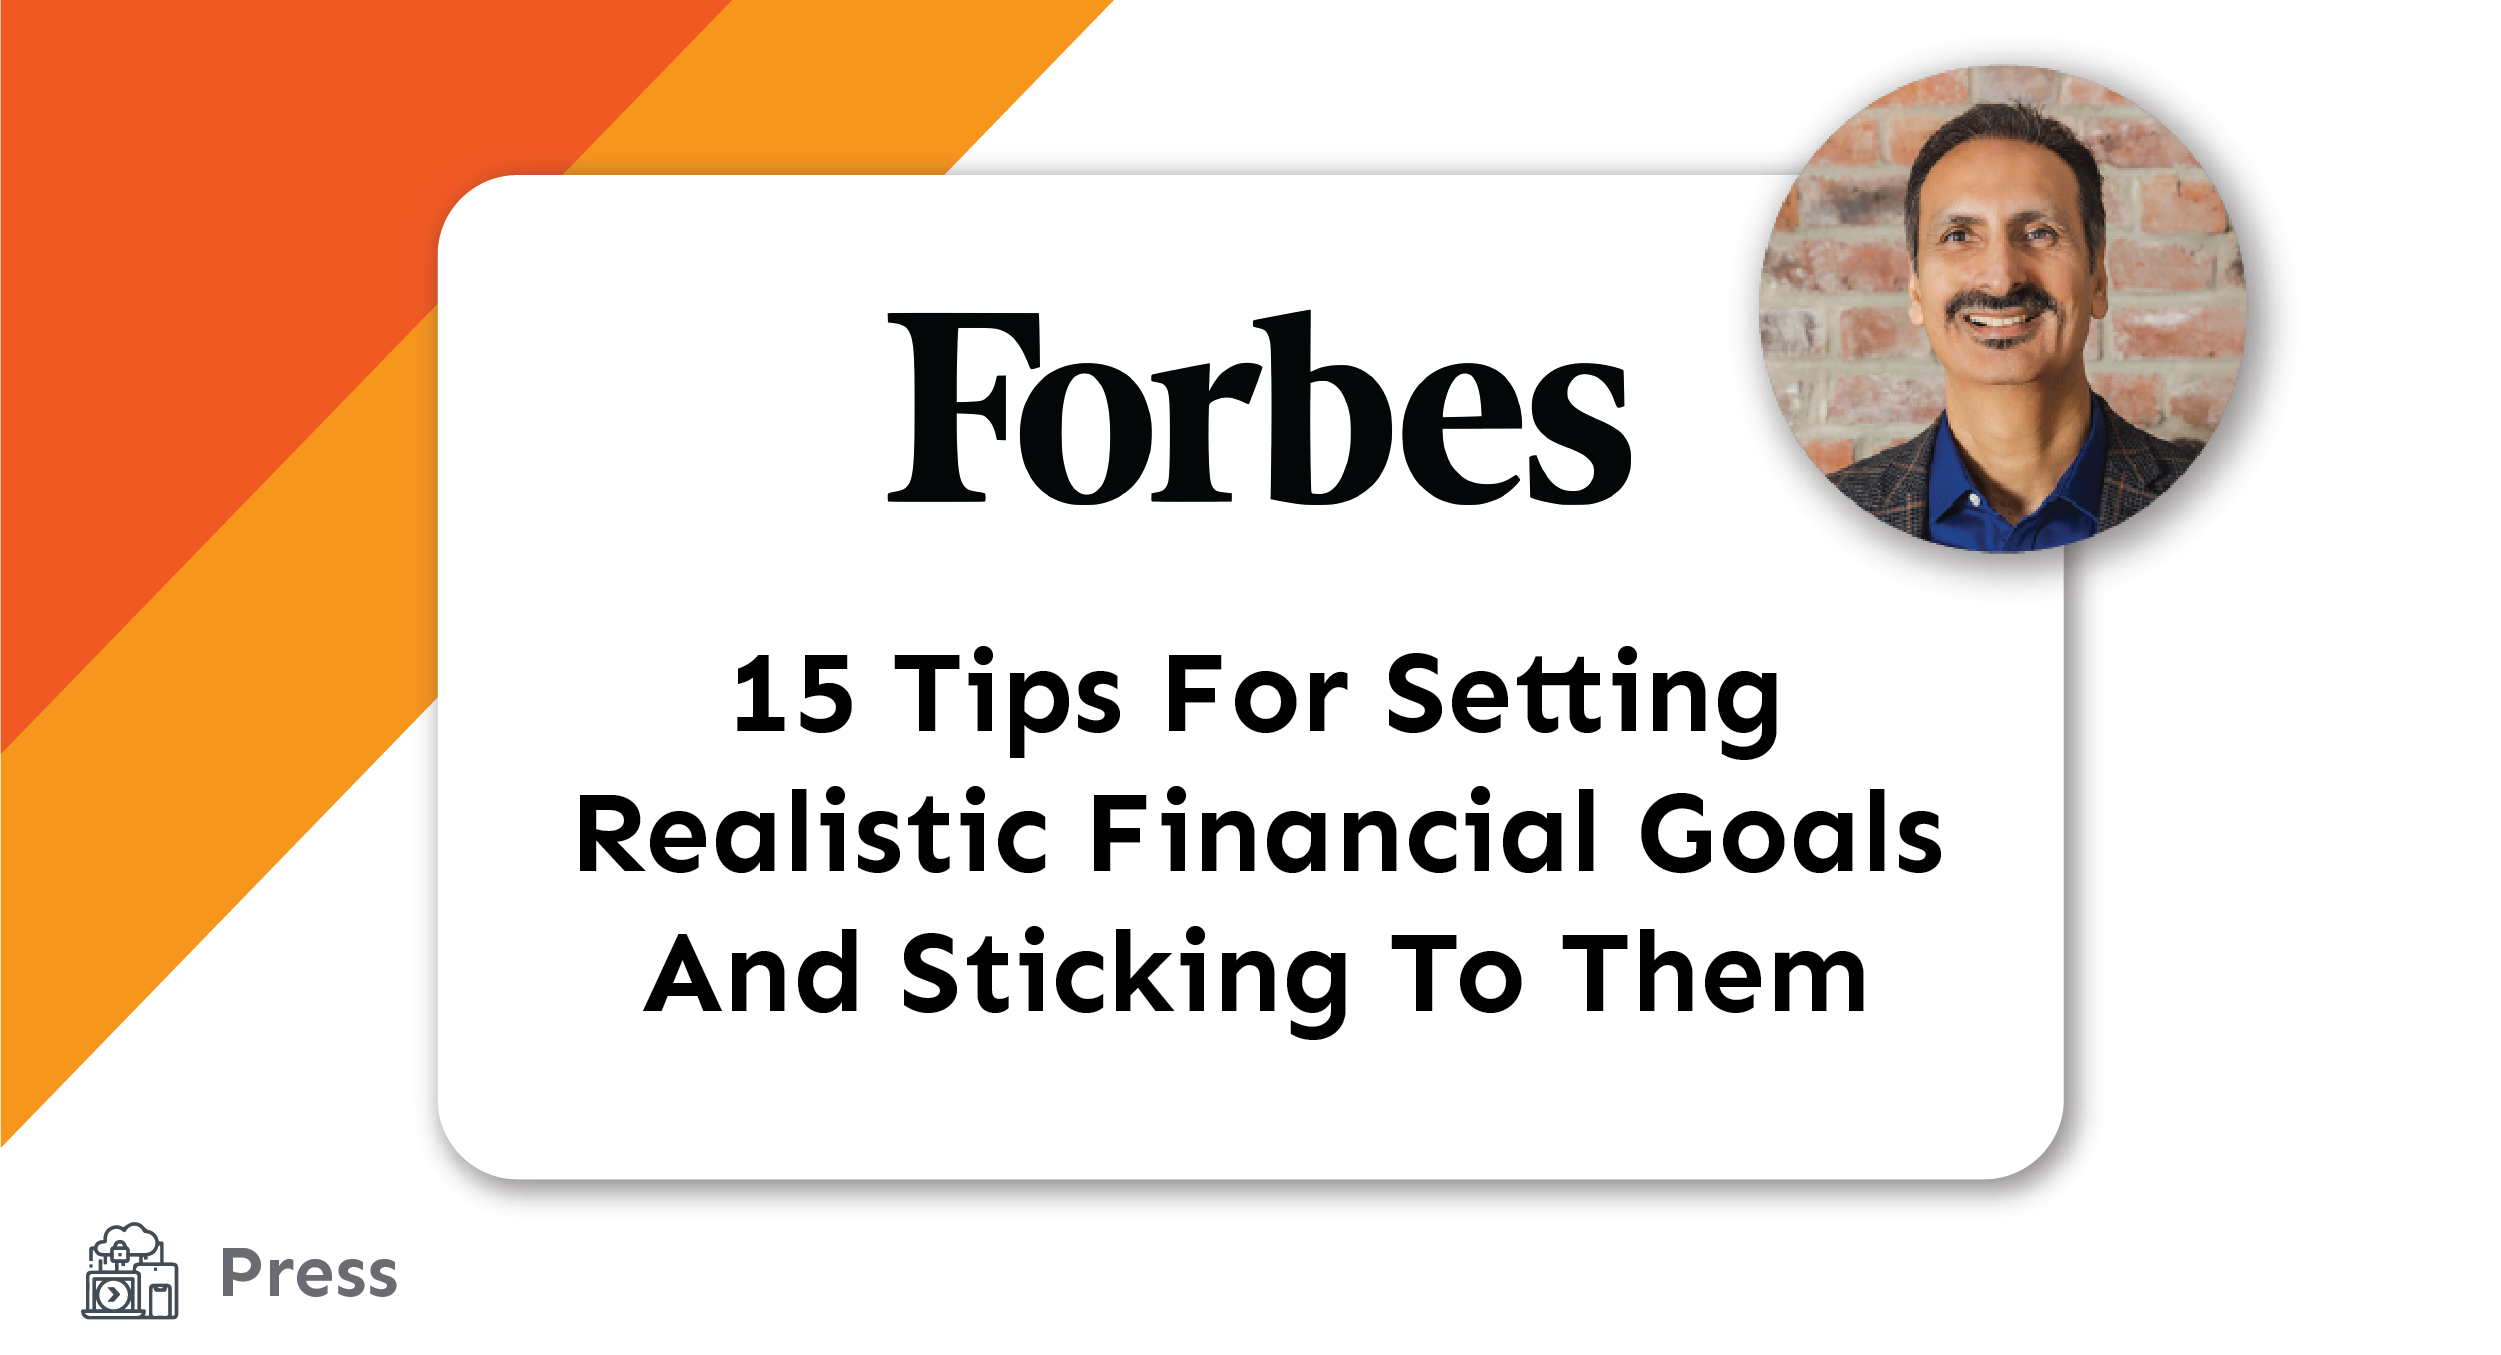 Press - 15 Tips For Setting Realistic Financial Goals And Sticking To Them Title Card